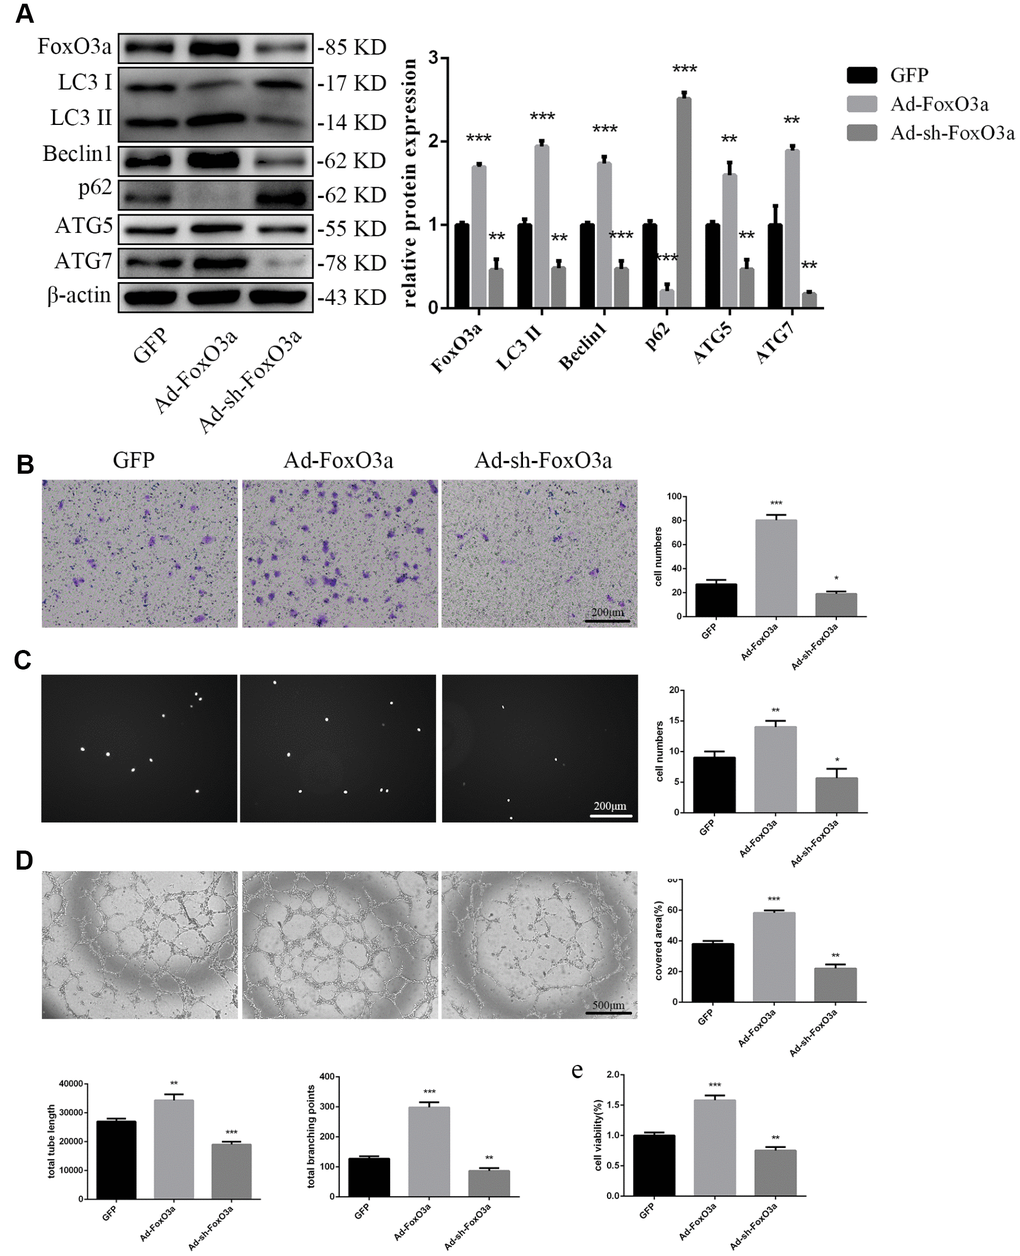 FoxO3a promoted autophagy and cellular function. (A) LC3 II, Beclin1, p62, ATG5, and ATG7 protein levels were detected by western blotting after transfection with Ad-FoxO3a or Ad-sh-FoxO3a for 48 h. (B) Cell migration was evaluated by Transwell migration assays after transfection with Ad-FoxO3a or Ad-sh-FoxO3a for 48 h. (C) Cell adhesion ability was evaluated by matrix adhesion assays after transfection with Ad-FoxO3a or Ad-sh-FoxO3a for 48 h. (D) Angiogenic ability was evaluated by Matrigel assays after transfection with Ad-FoxO3a or Ad-sh-FoxO3a for 48 h. (E) Cell viability was evaluated with CCK-8 after transfection with Ad-FoxO3a or Ad-sh-FoxO3a for 48 h. *P 